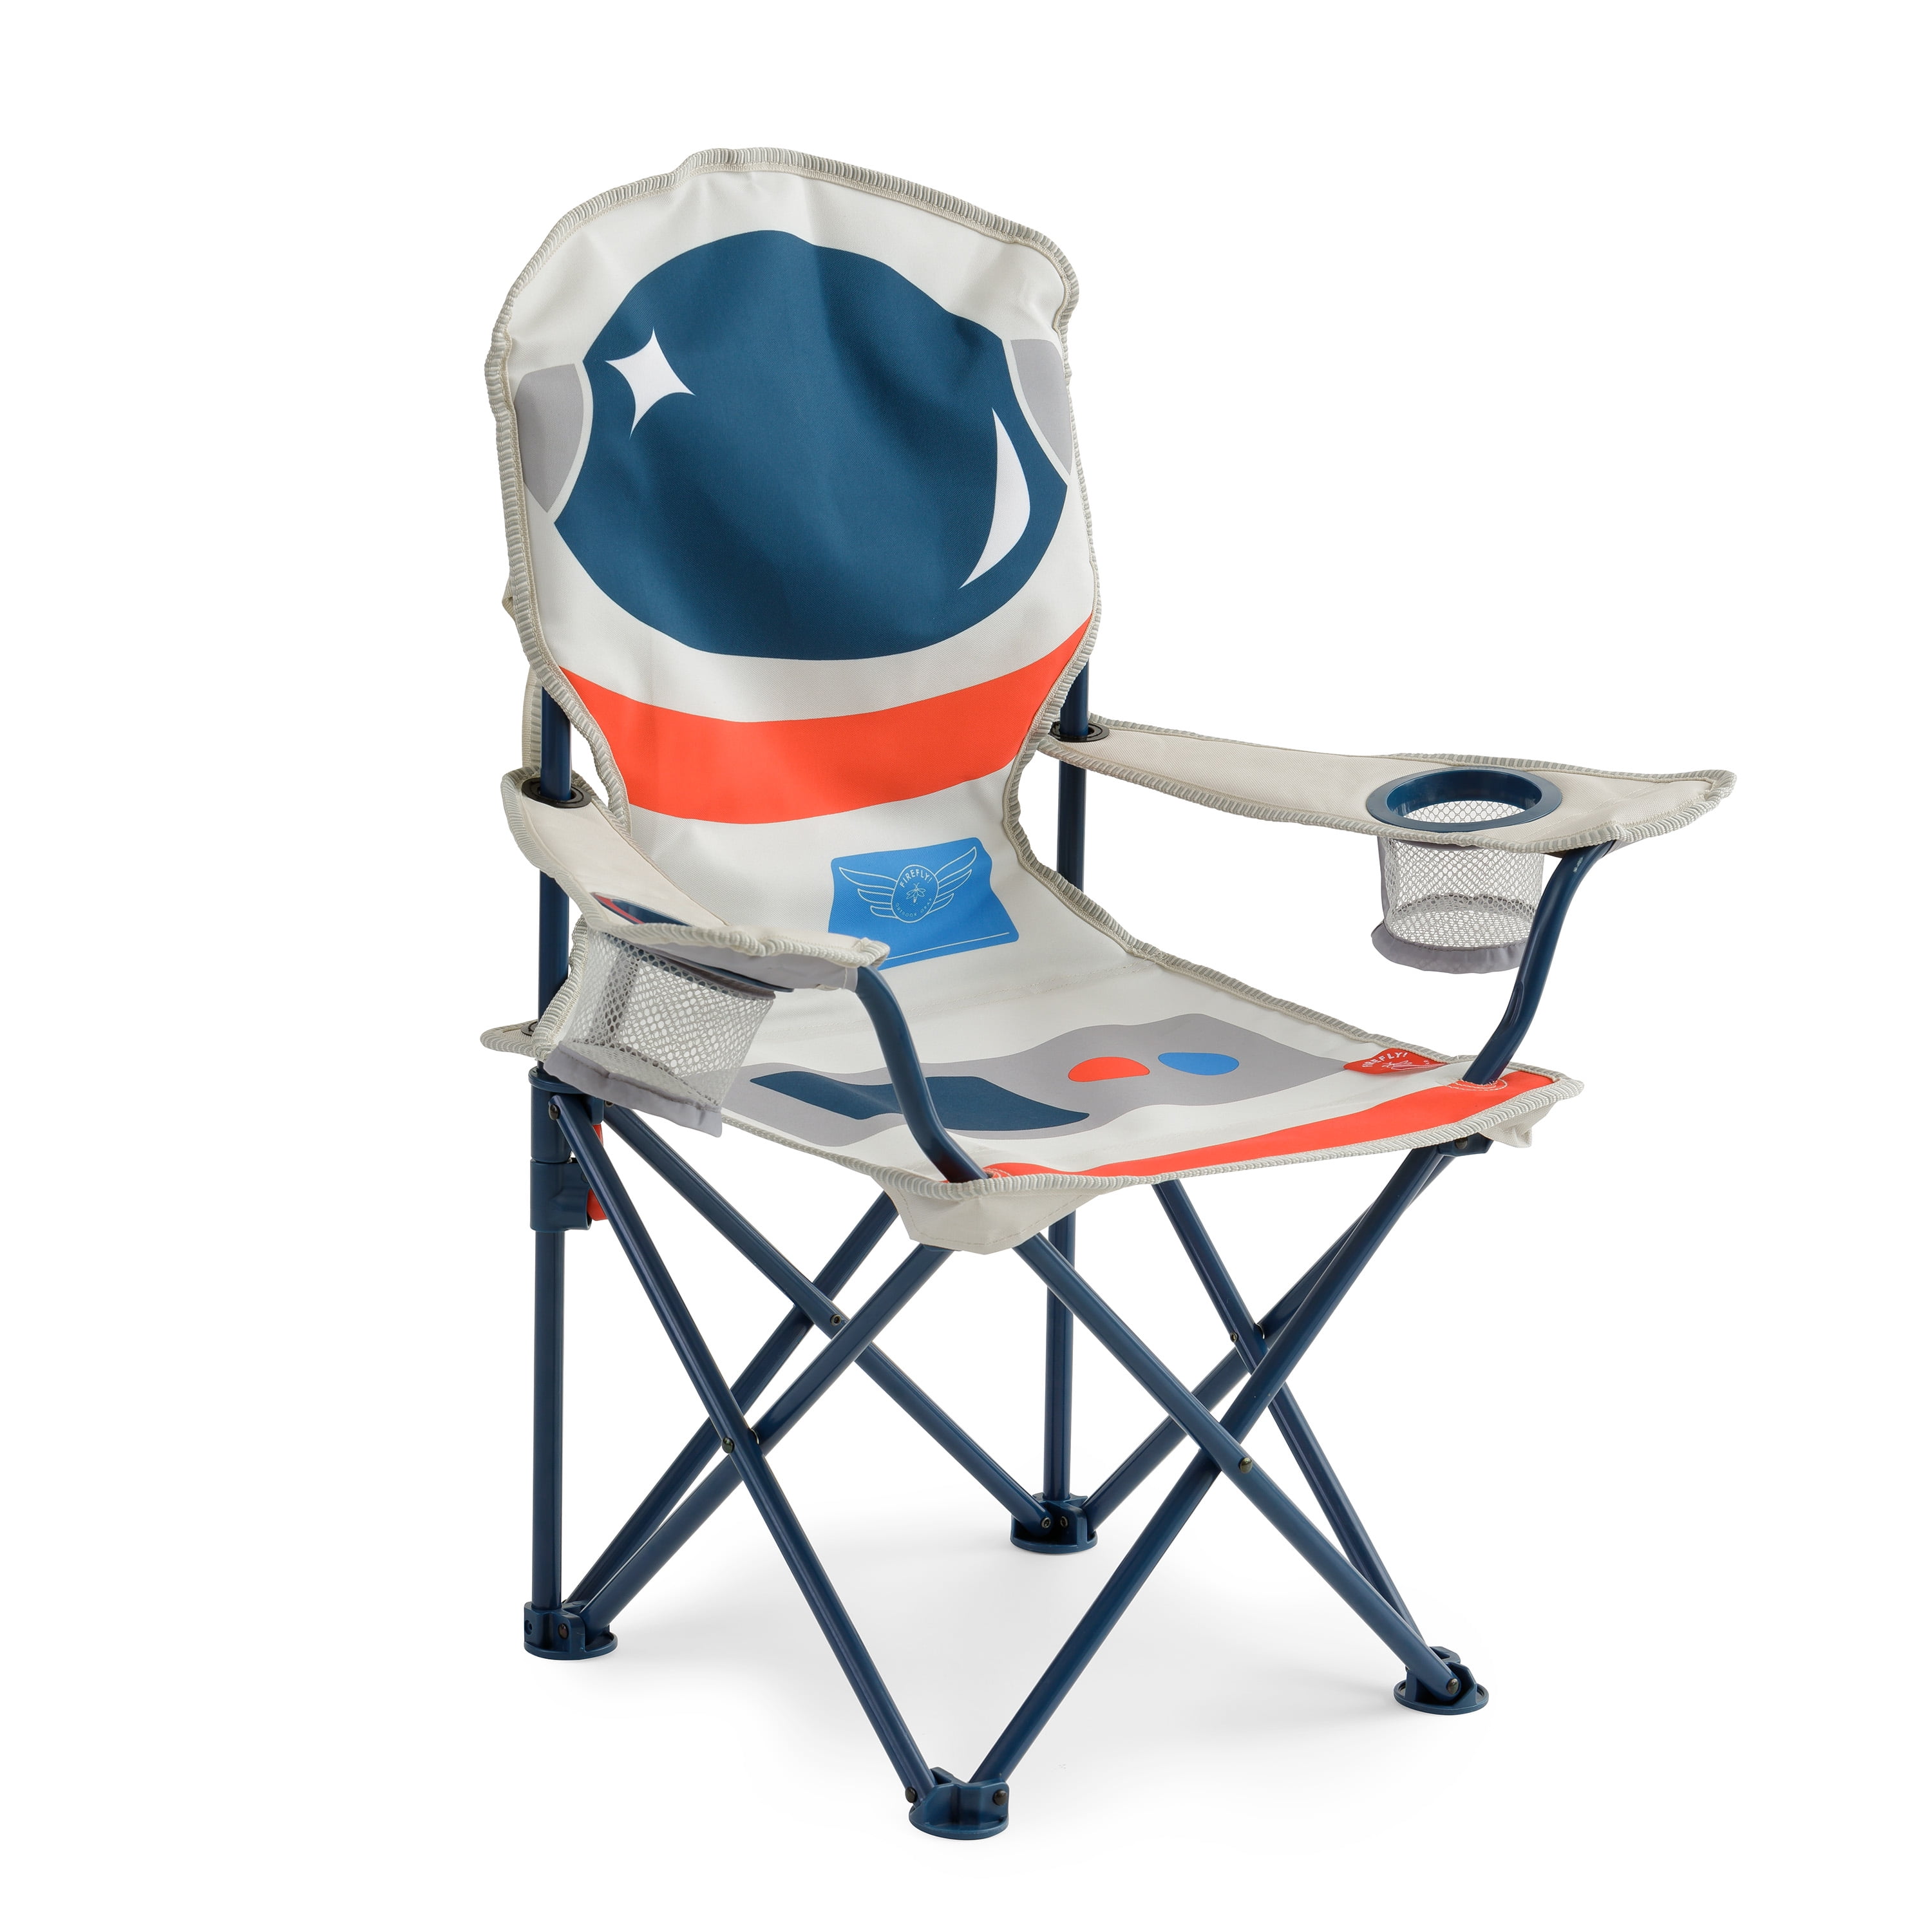 Firefly! Outdoor Gear Jett the Astronaut Kid's Camping Chair - Gray/Blue Color